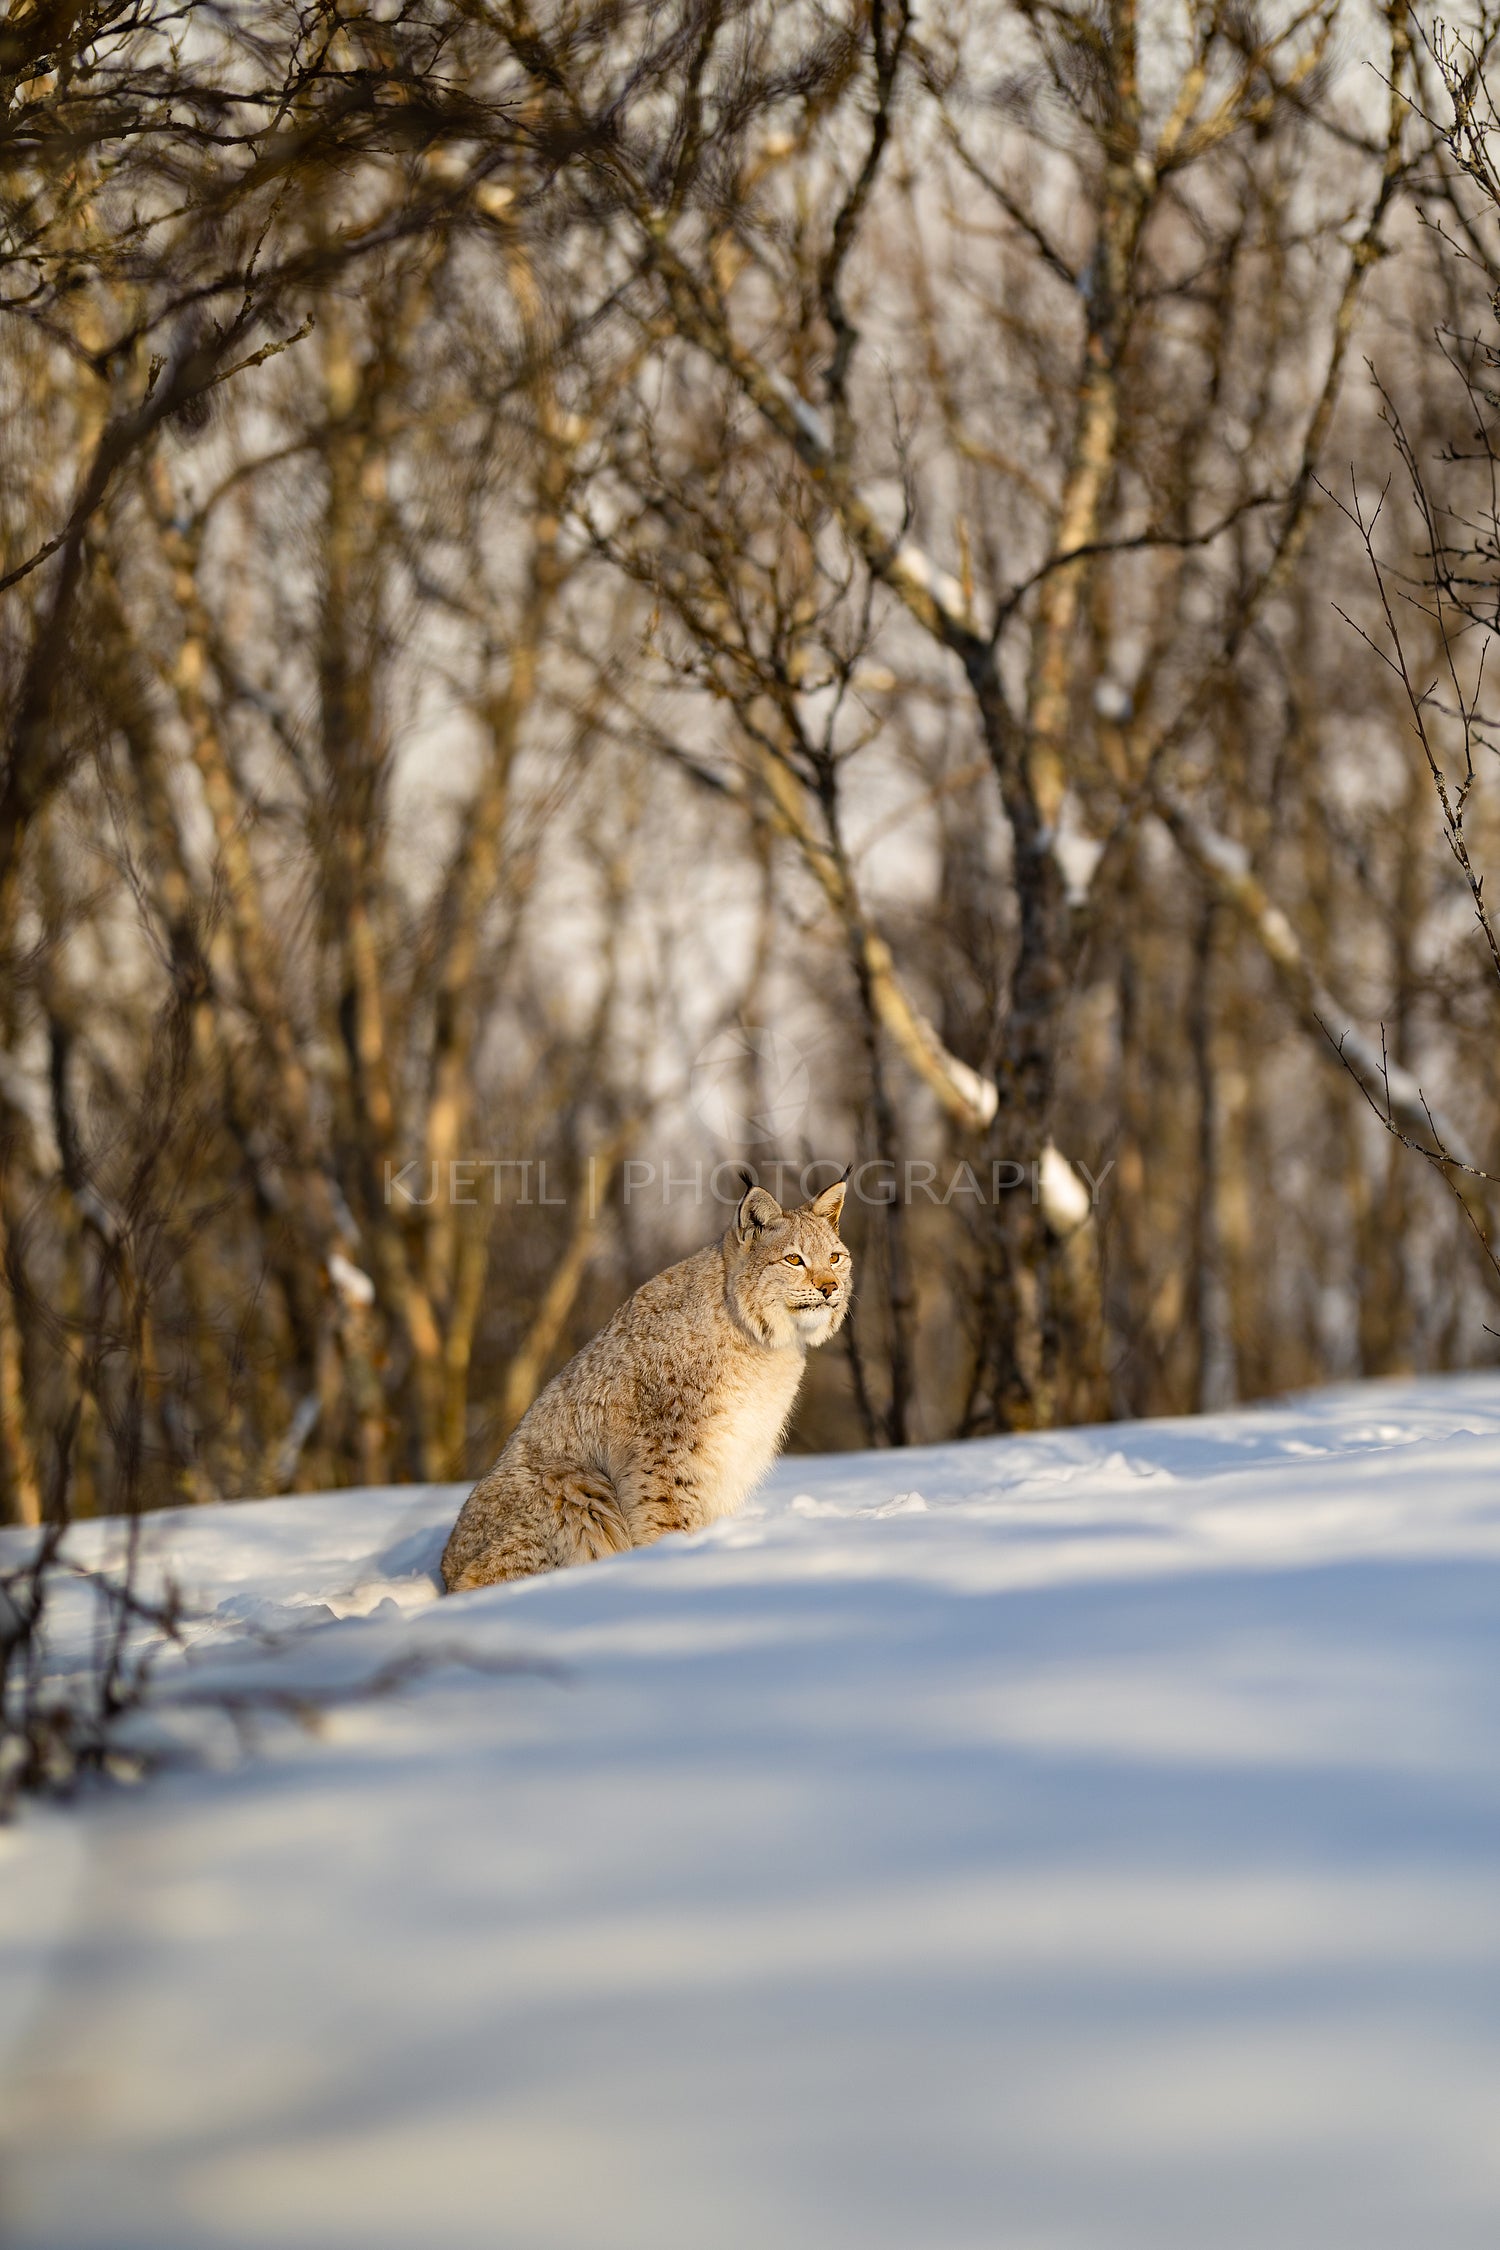 Lynx looking away while sitting on snow in nature